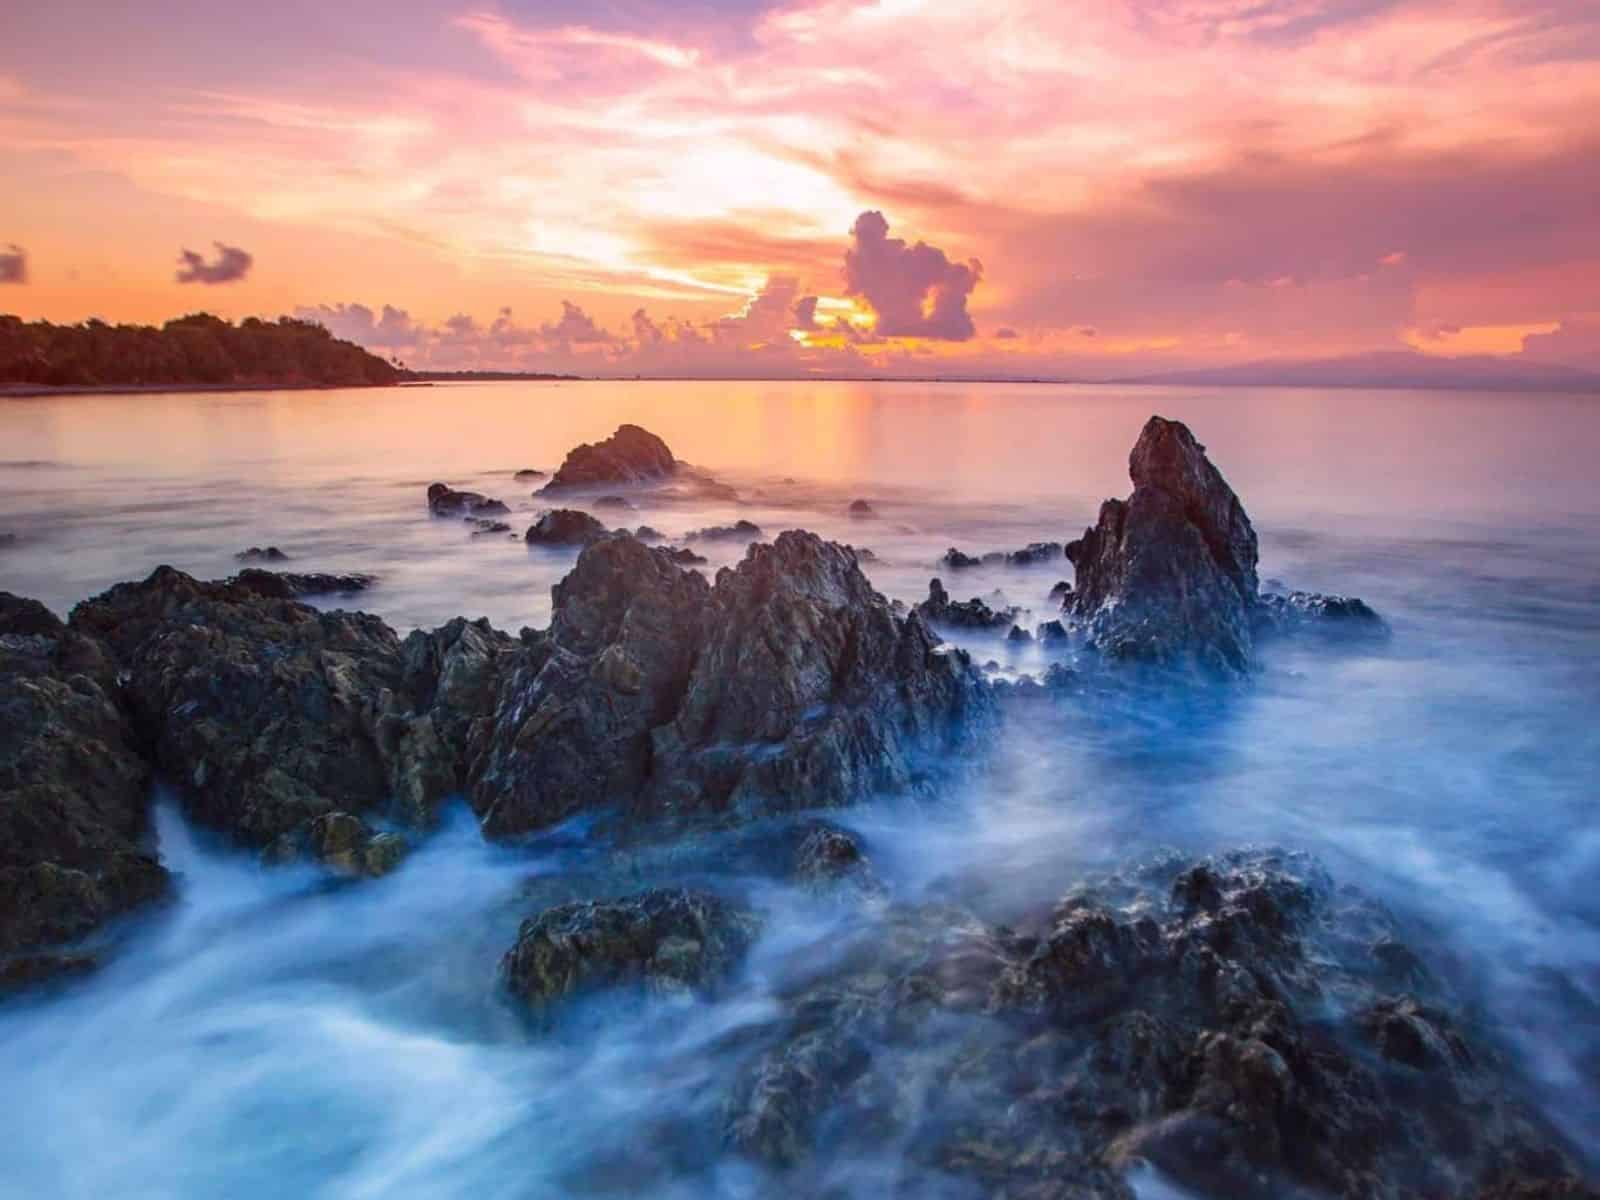 Best things to do in Vieques Puerto Rico - Kelly Cronin - Bastimento Beach Vieques photo by Dorian Sanders 1600x1200